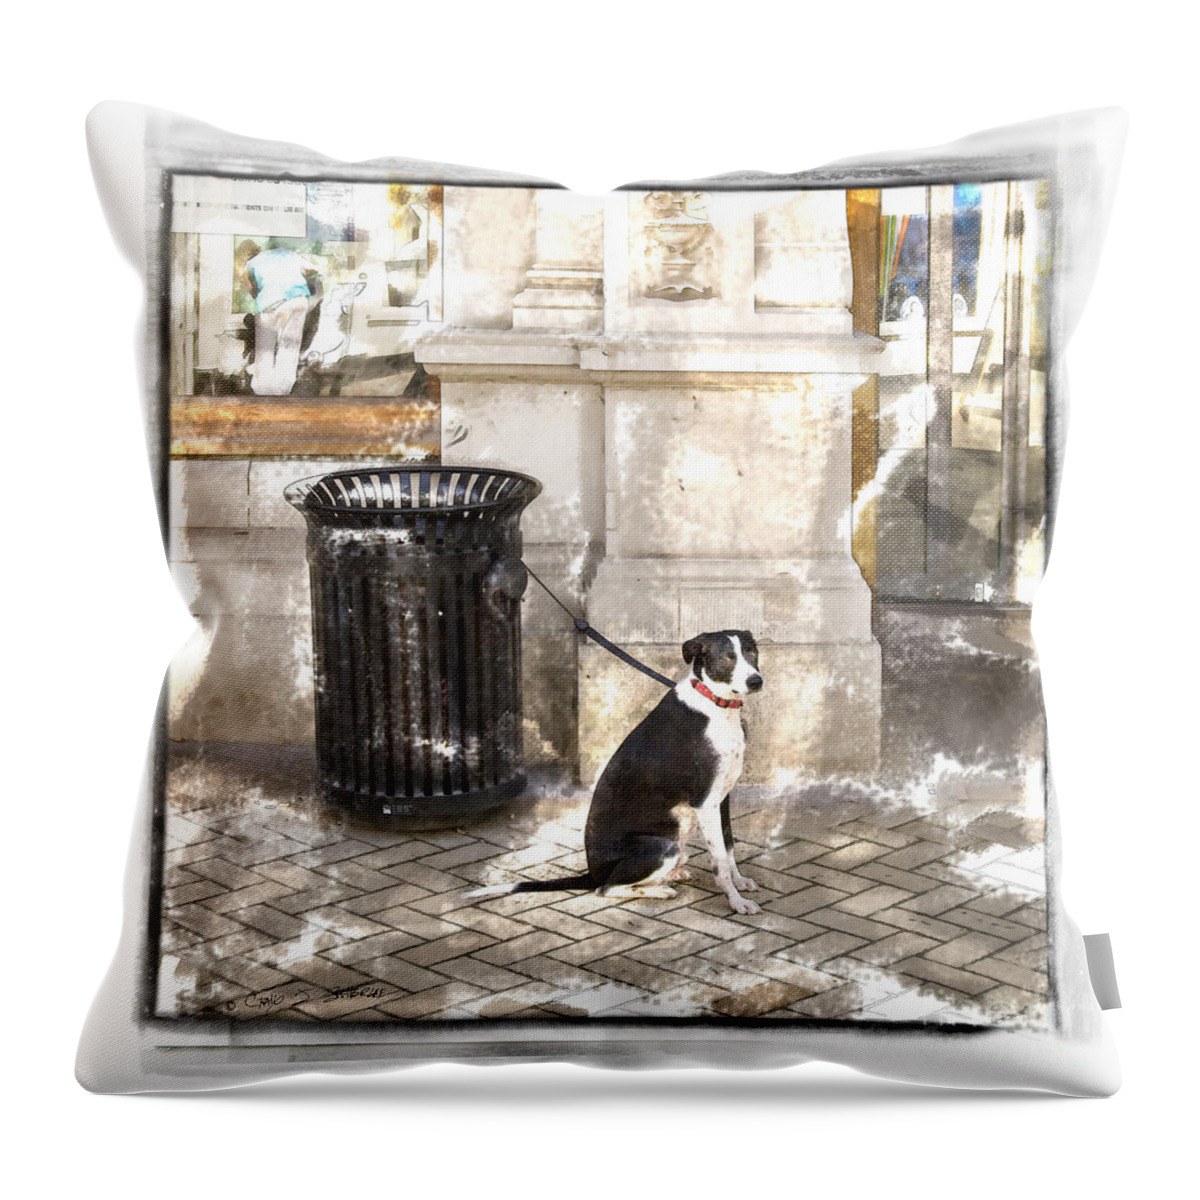 England Throw Pillow featuring the photograph Loyal Dog by Craig J Satterlee